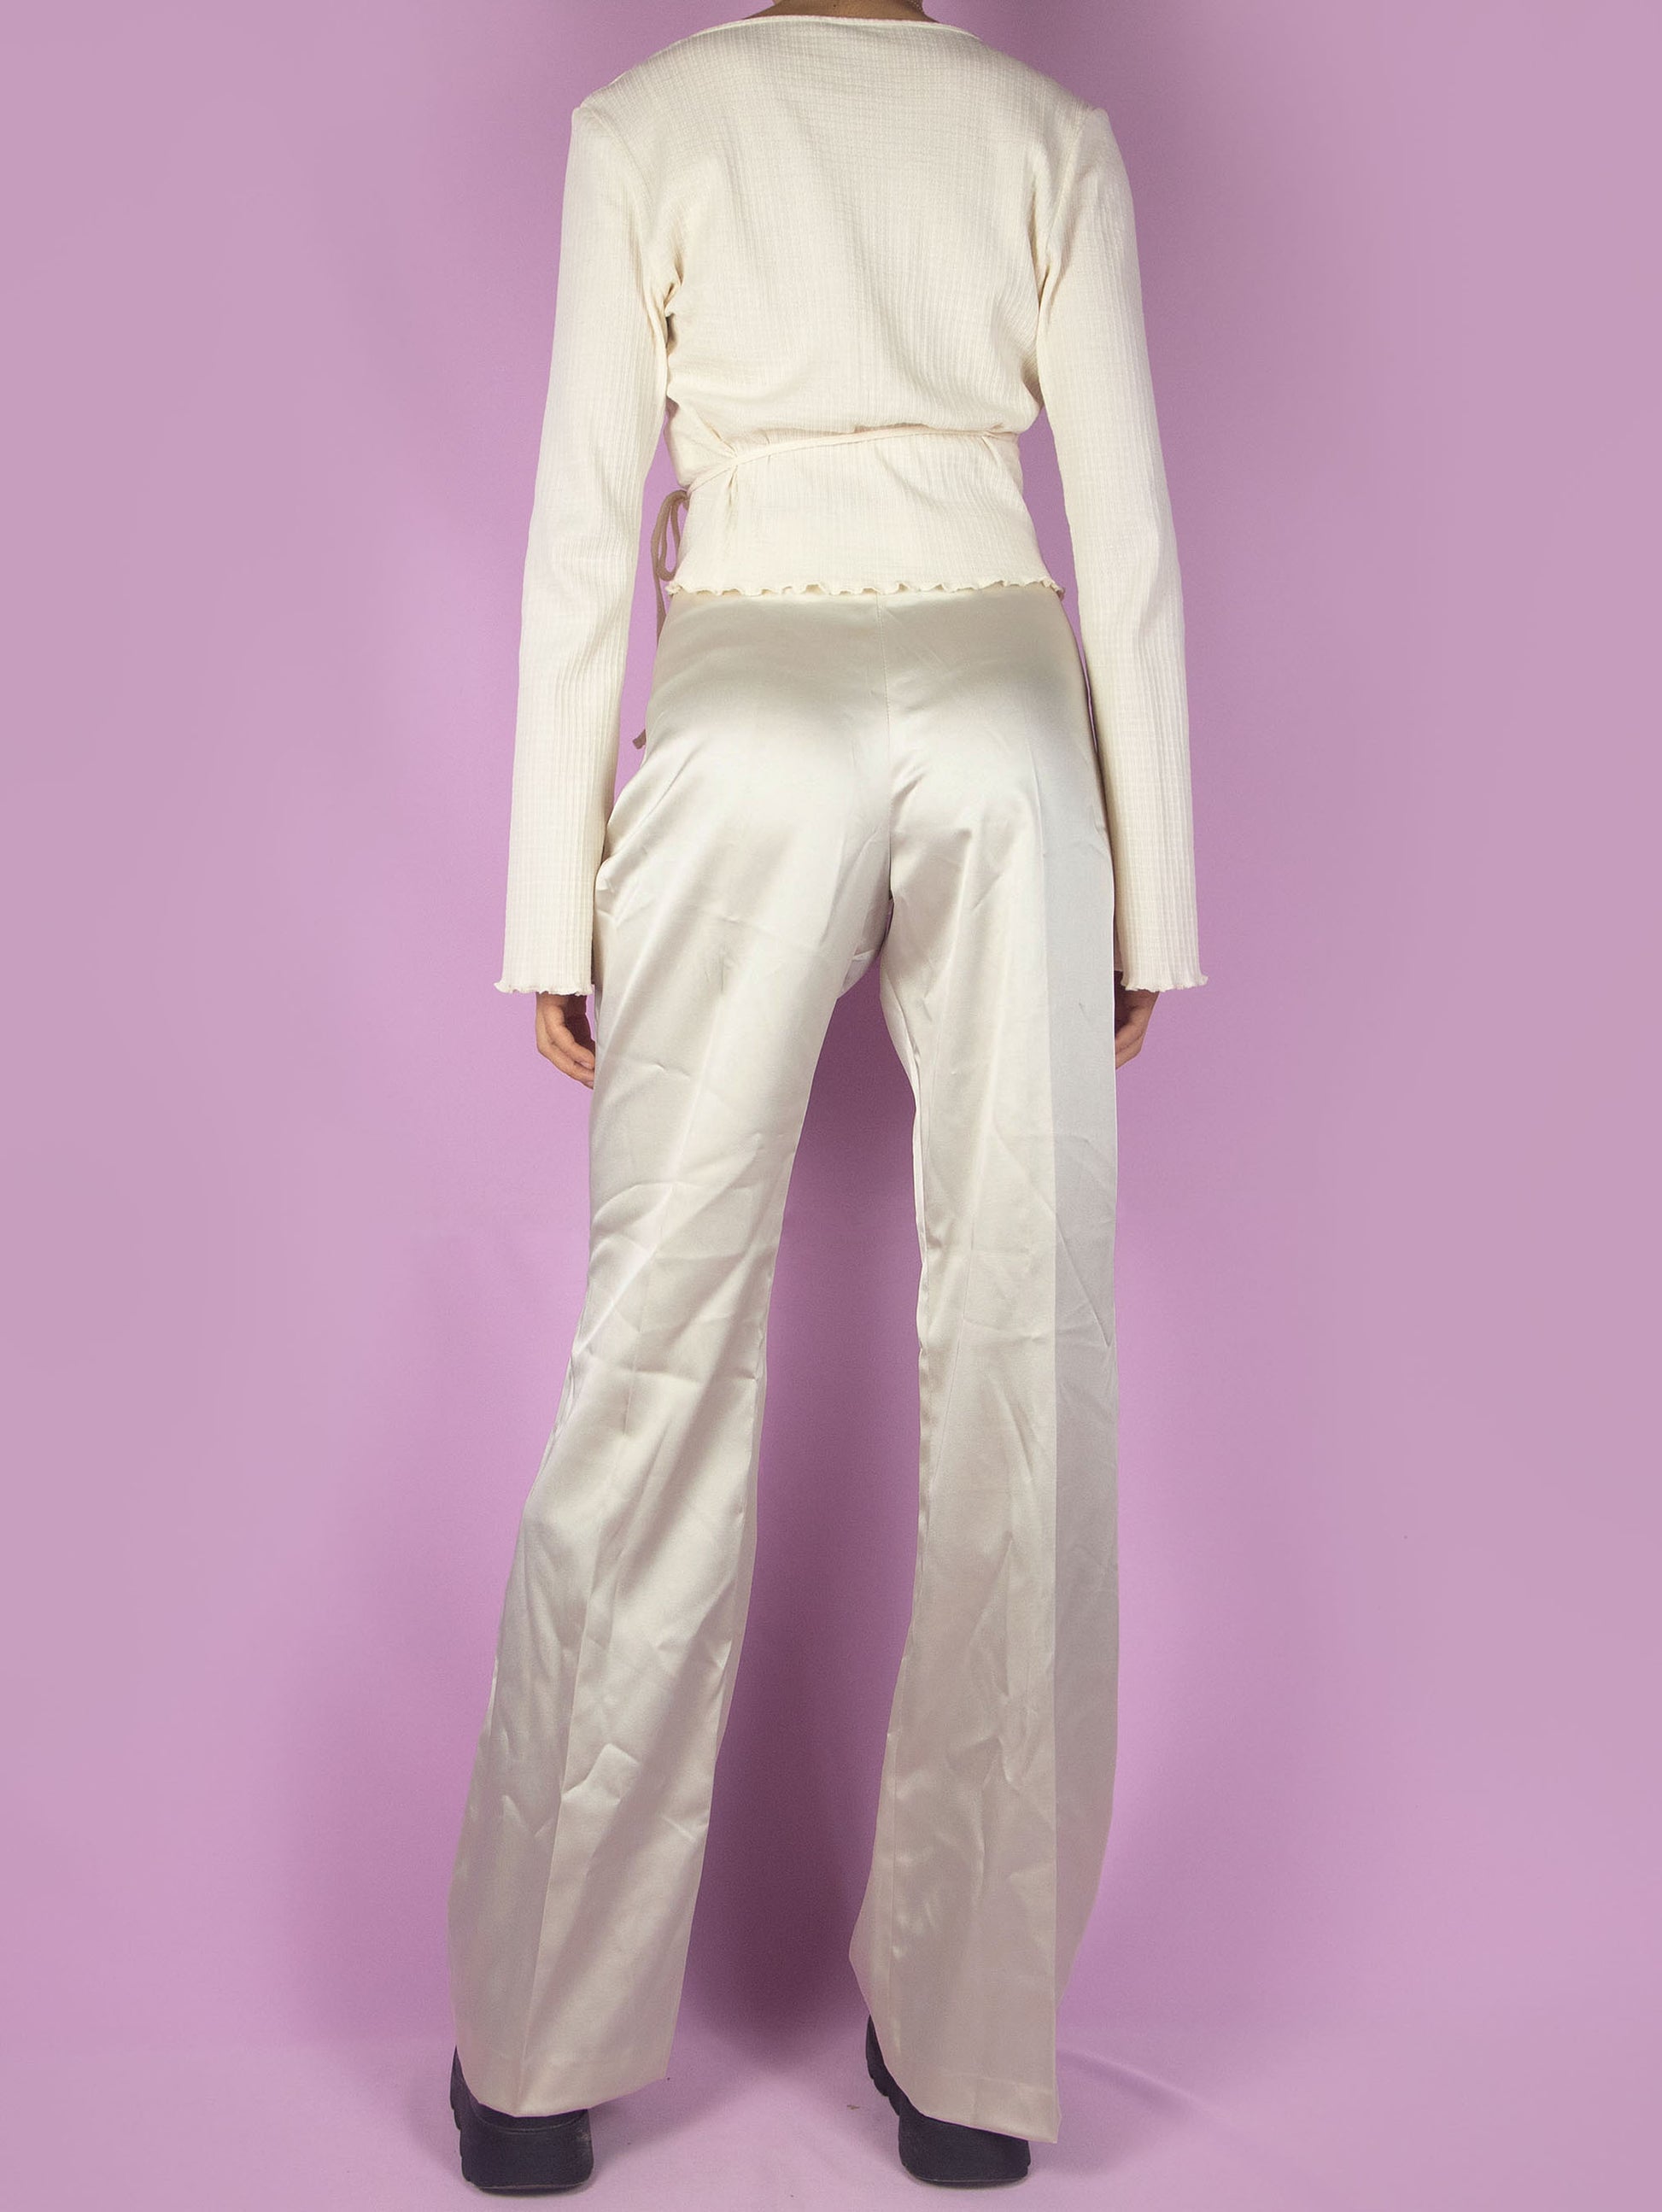 The Y2K Beige Flare Pants are vintage mid-rise shiny satin trousers, slightly elastic, with a side zipper closure. Elegant 2000s evening cocktail party trousers. Made in Italy.